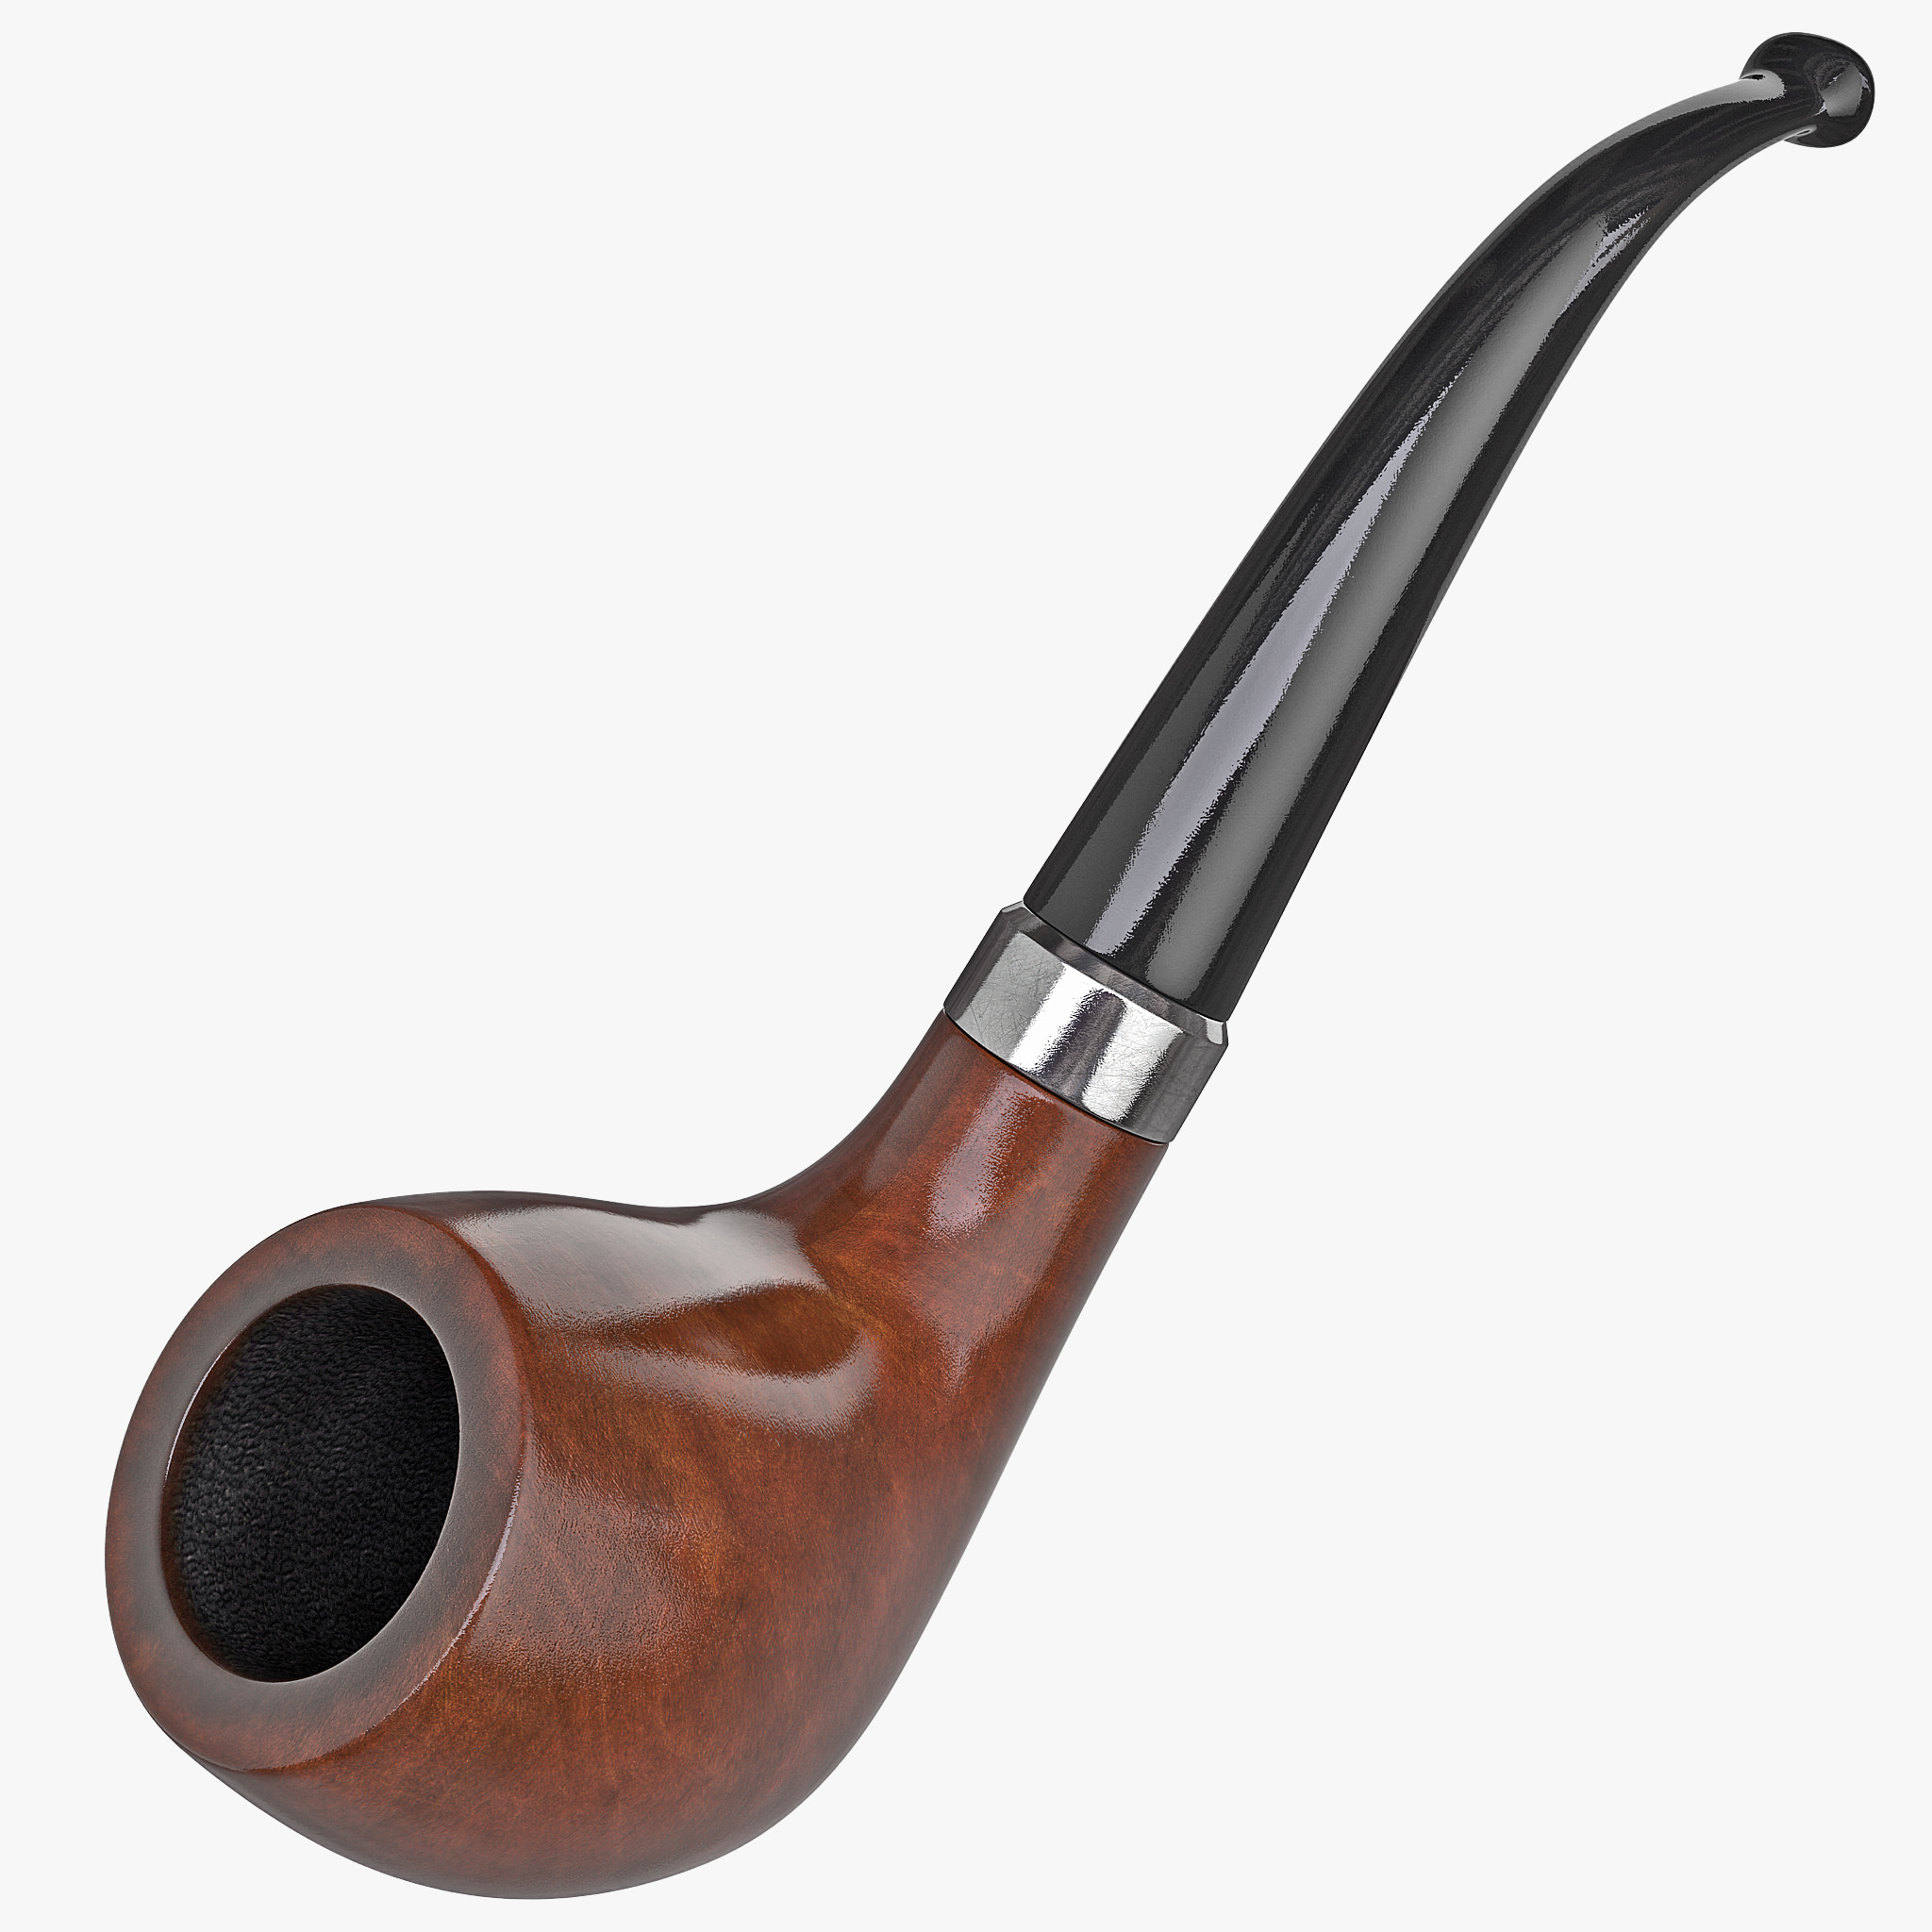 Searched 3d models for Wizard (Calabash) Smoking Pipe